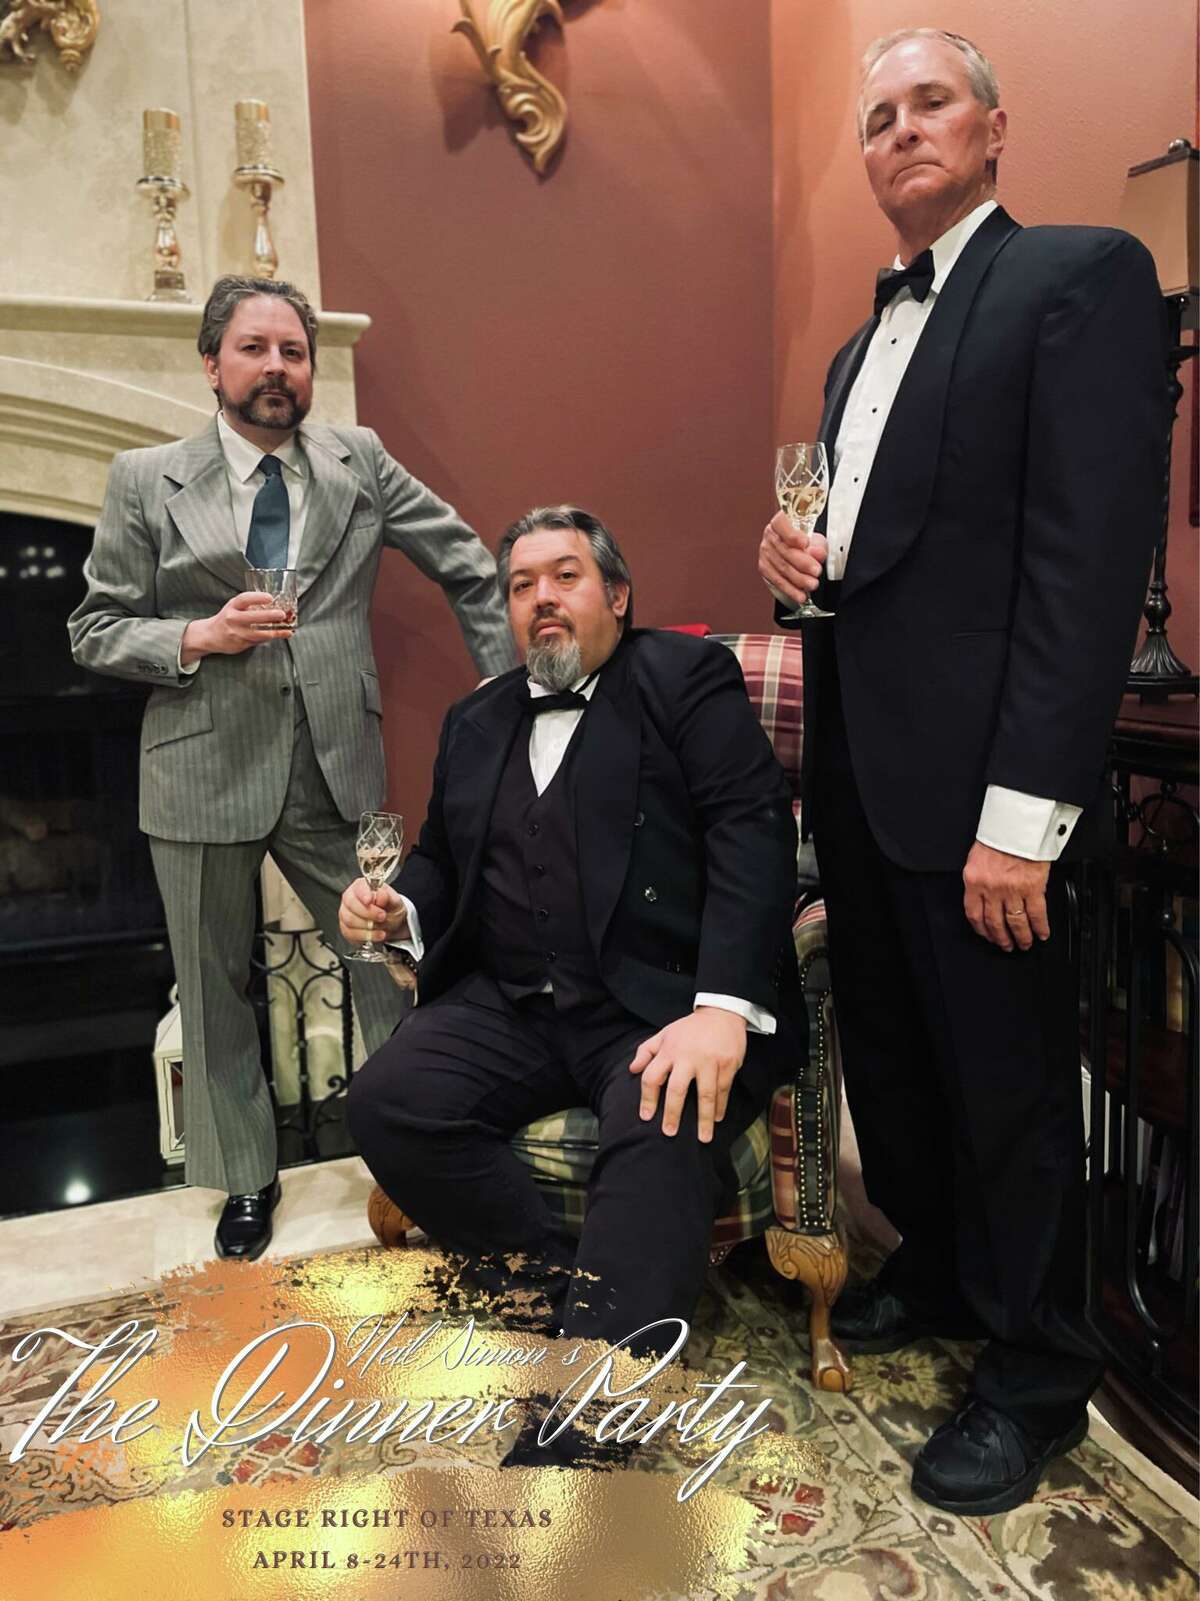 Stage Right of Texas — the resident theater group of the Crighton Theatre — continues its 14th season with Neil Simon’s farce-turned-dramedy “The Dinner Party.”